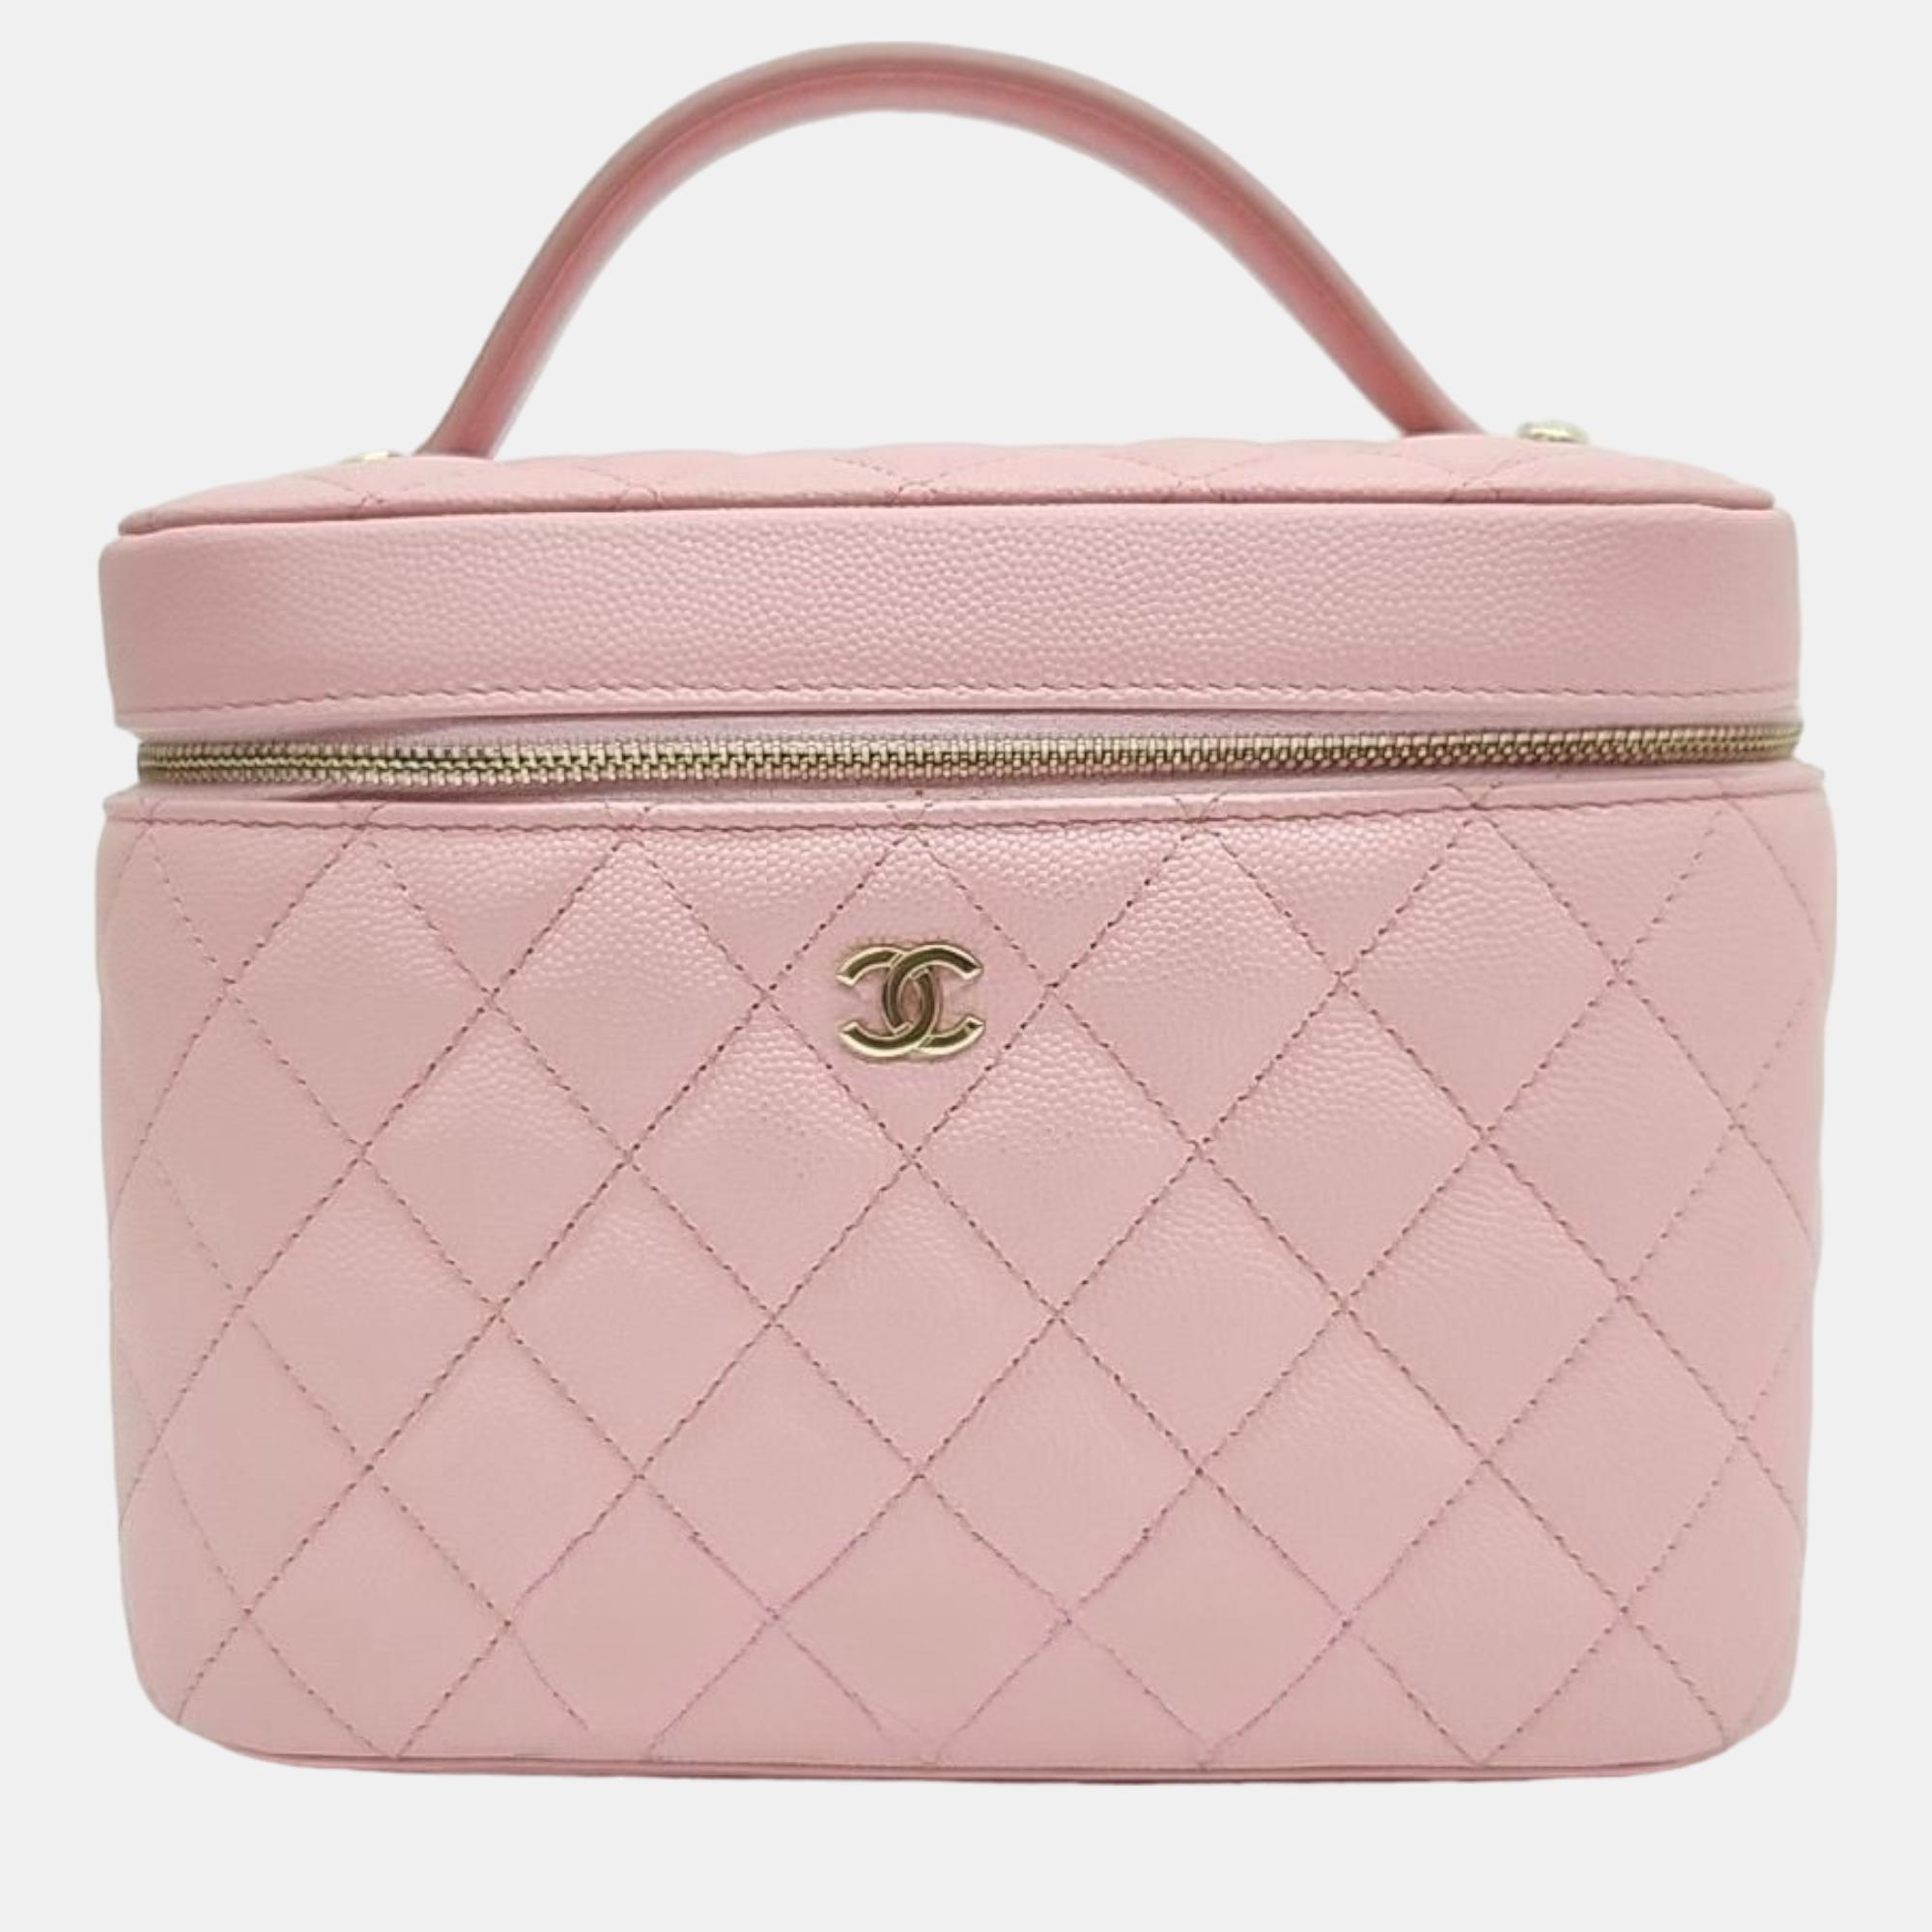 Chanel light pink caviar leather vanity case